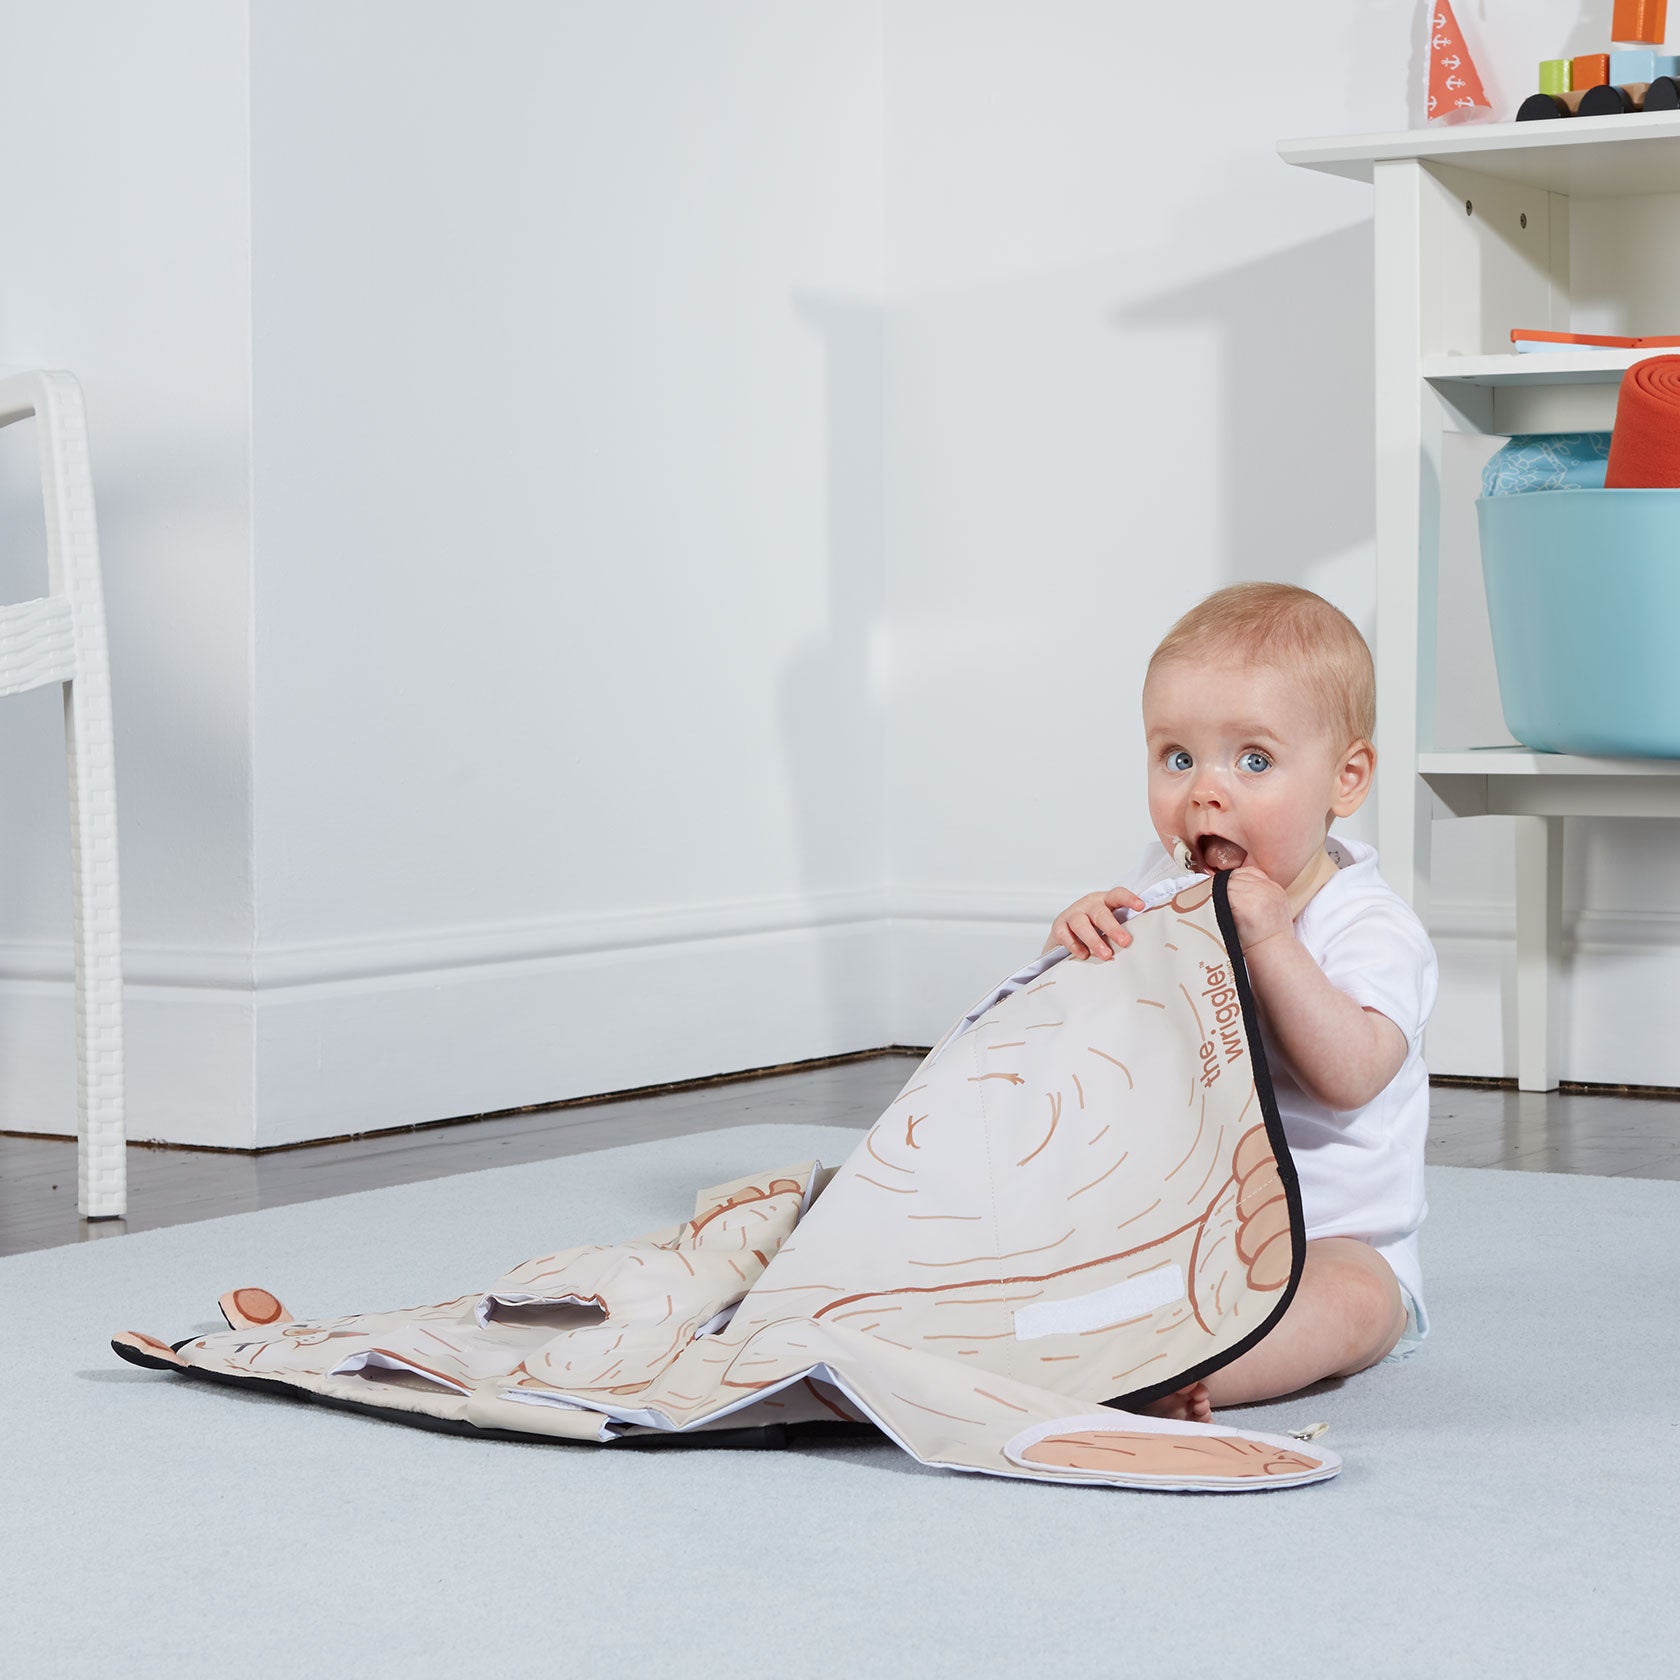 Baby placing The Wriggler changing pad in her mouth to show that the materials are BPA and phthalate free and rigorously safety tested to meet international safety standards